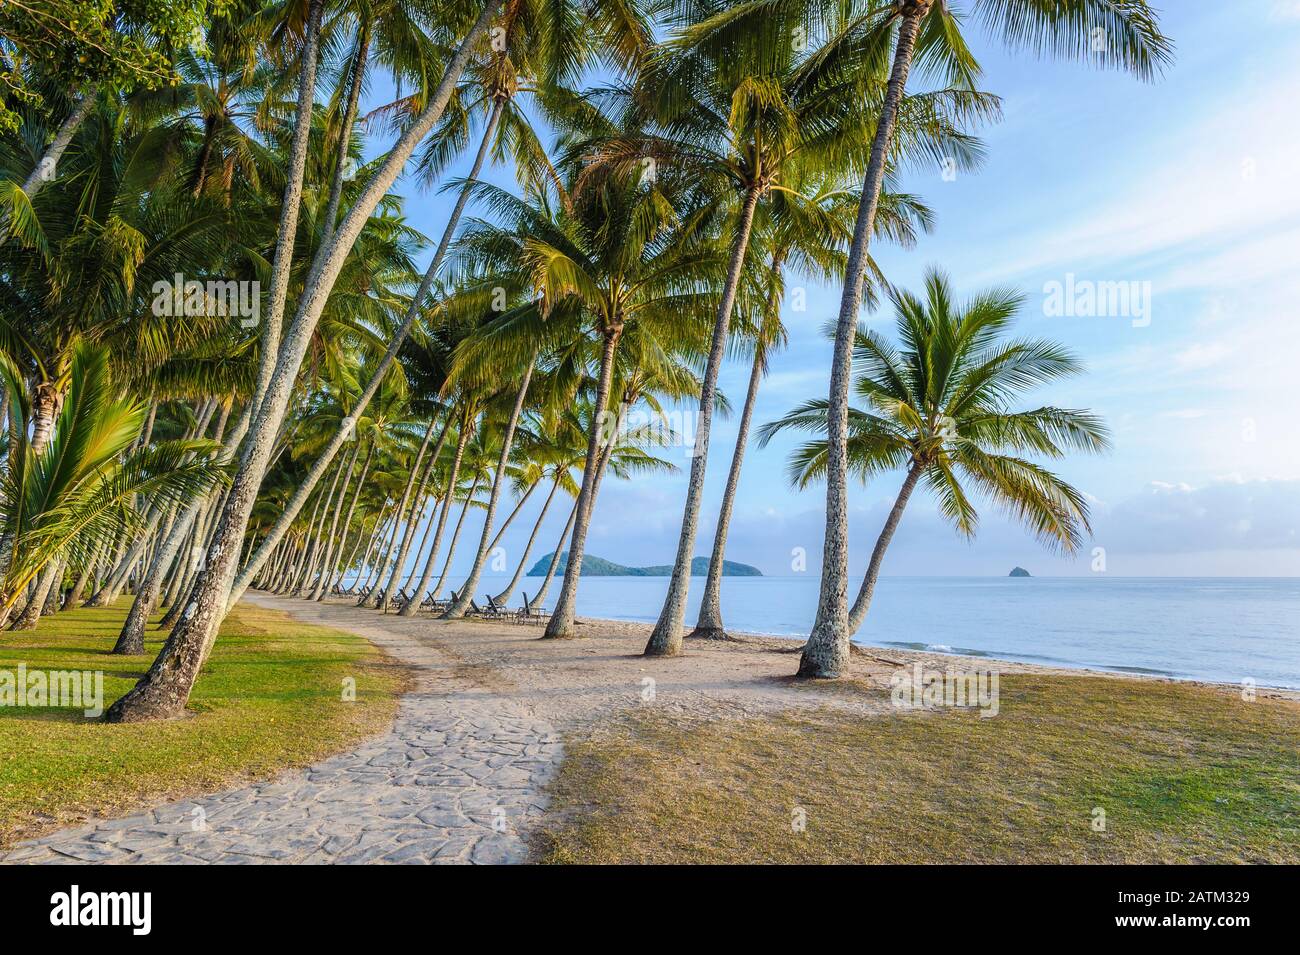 Female jogger on pathway leading through a forest of coconut palm trees with tropical islands in the pacific ocean at Palm Cove beach in Queensland. Stock Photo